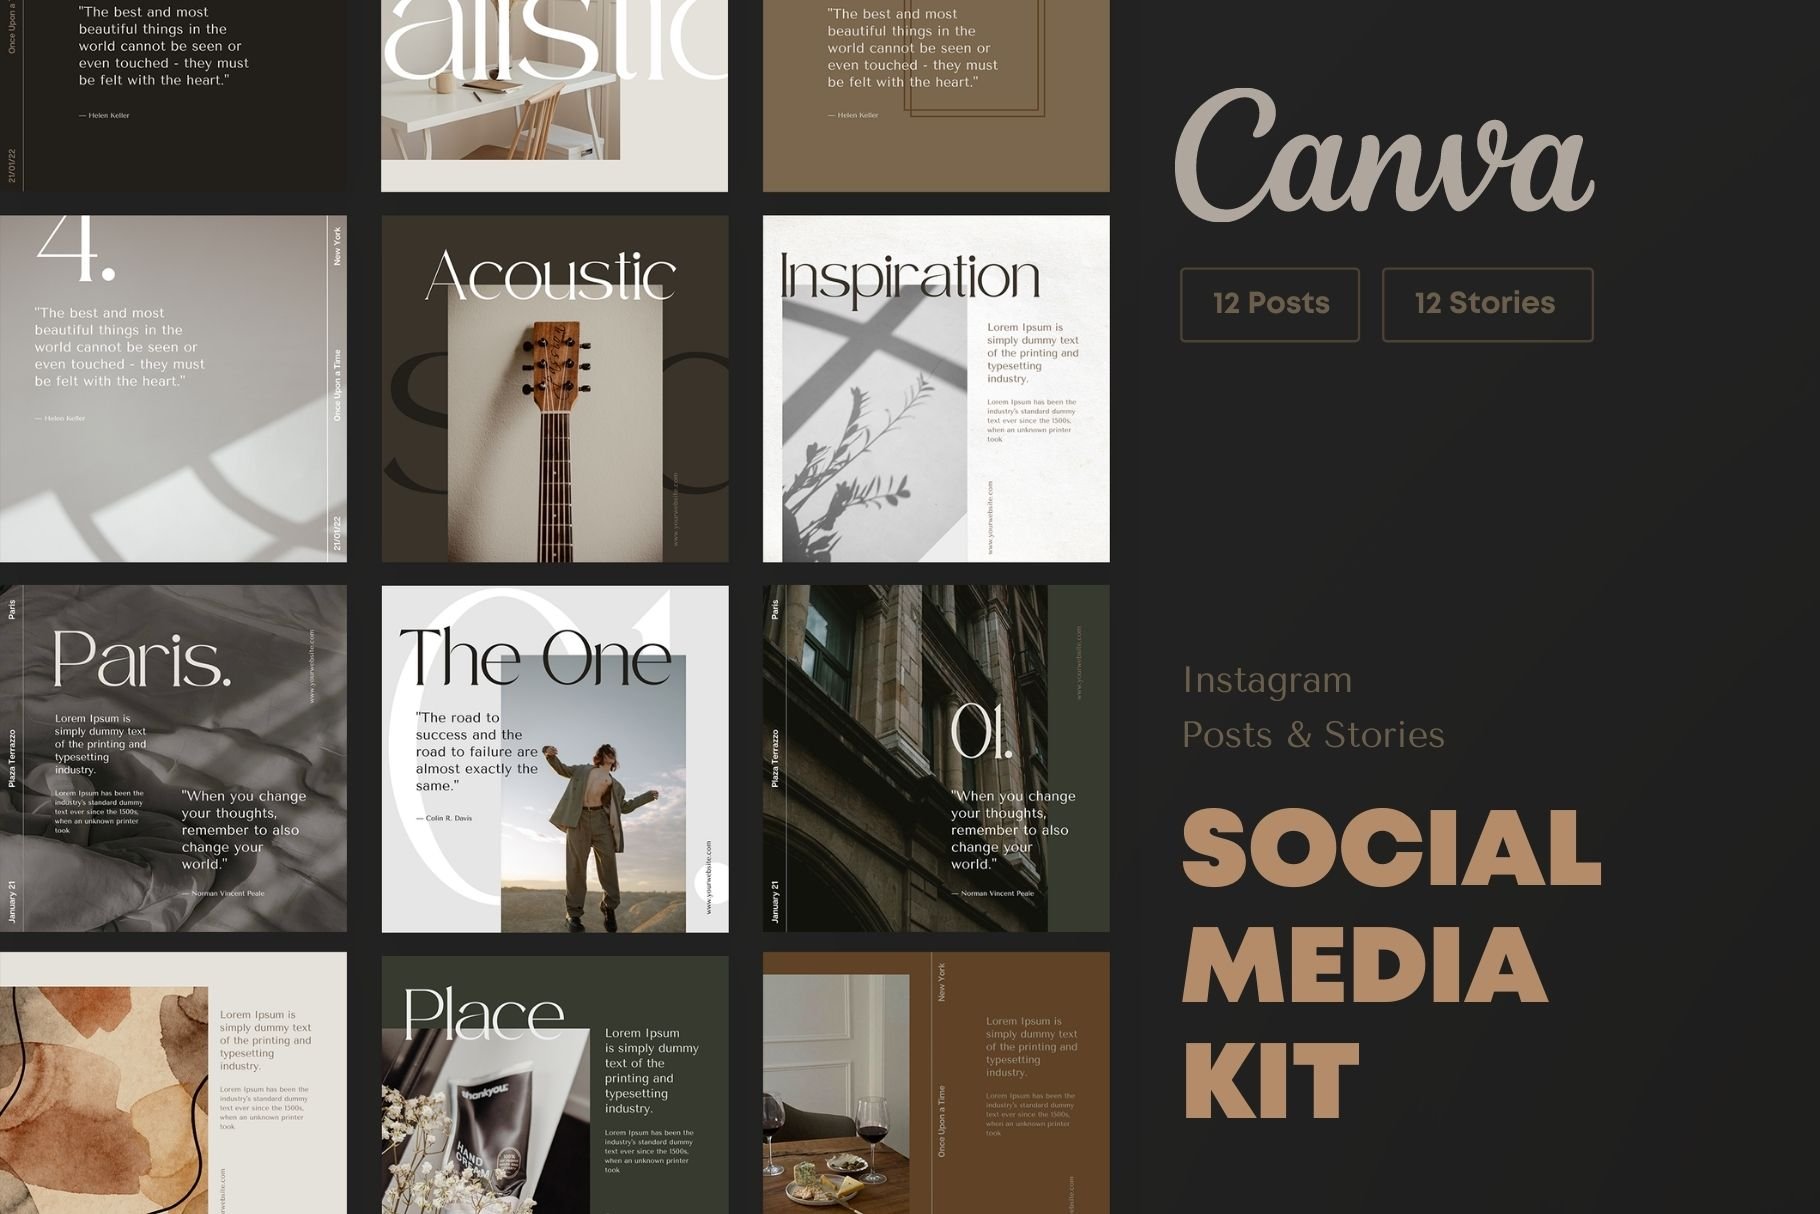 Instagram Templates for CANVA cover image.